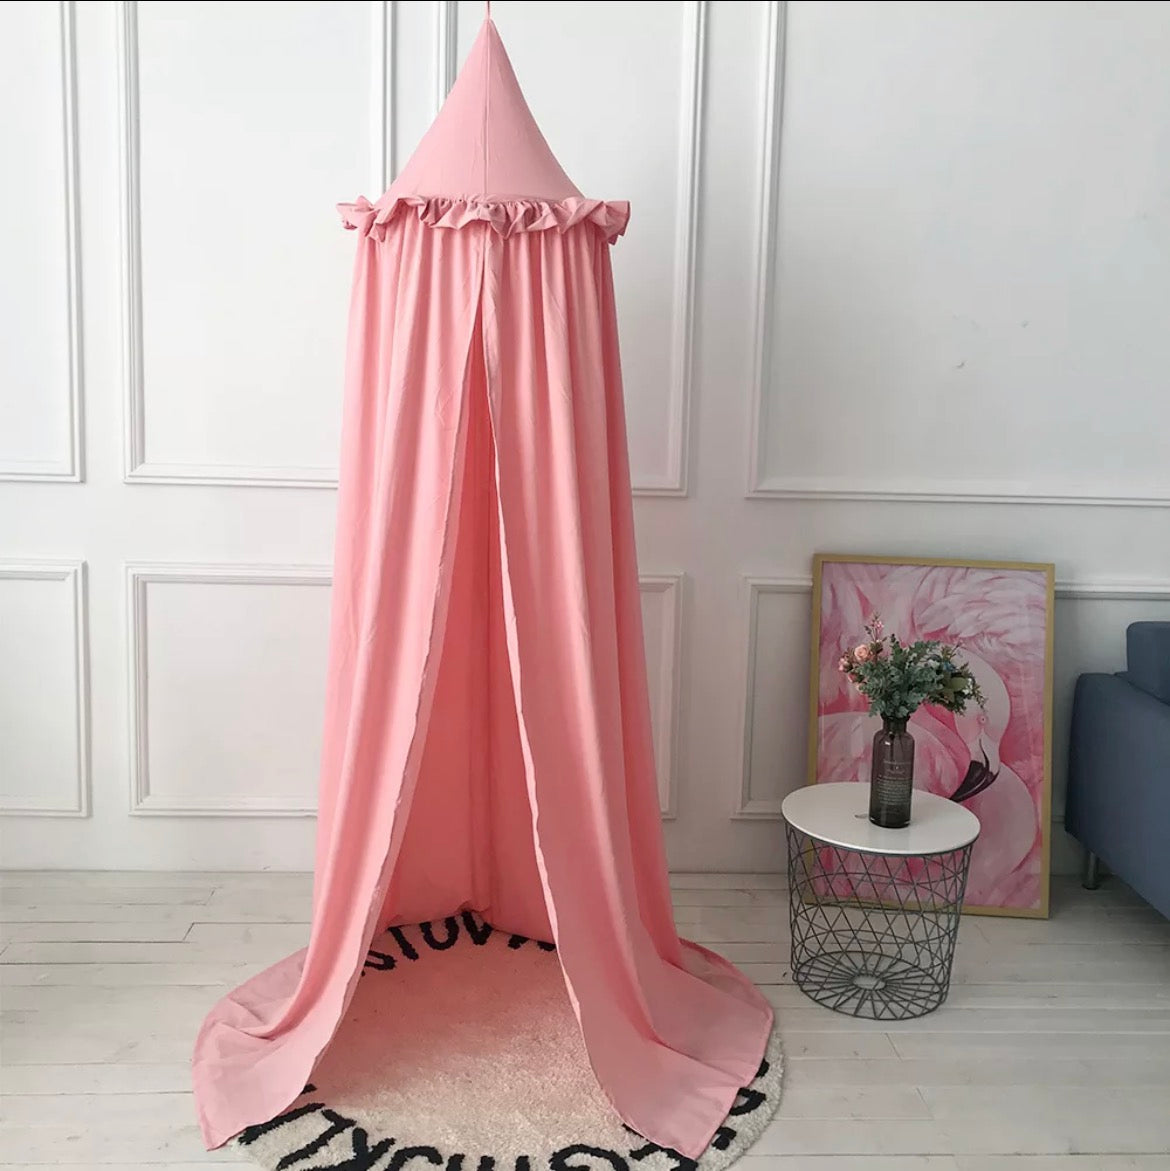 Cotton Bed canopy